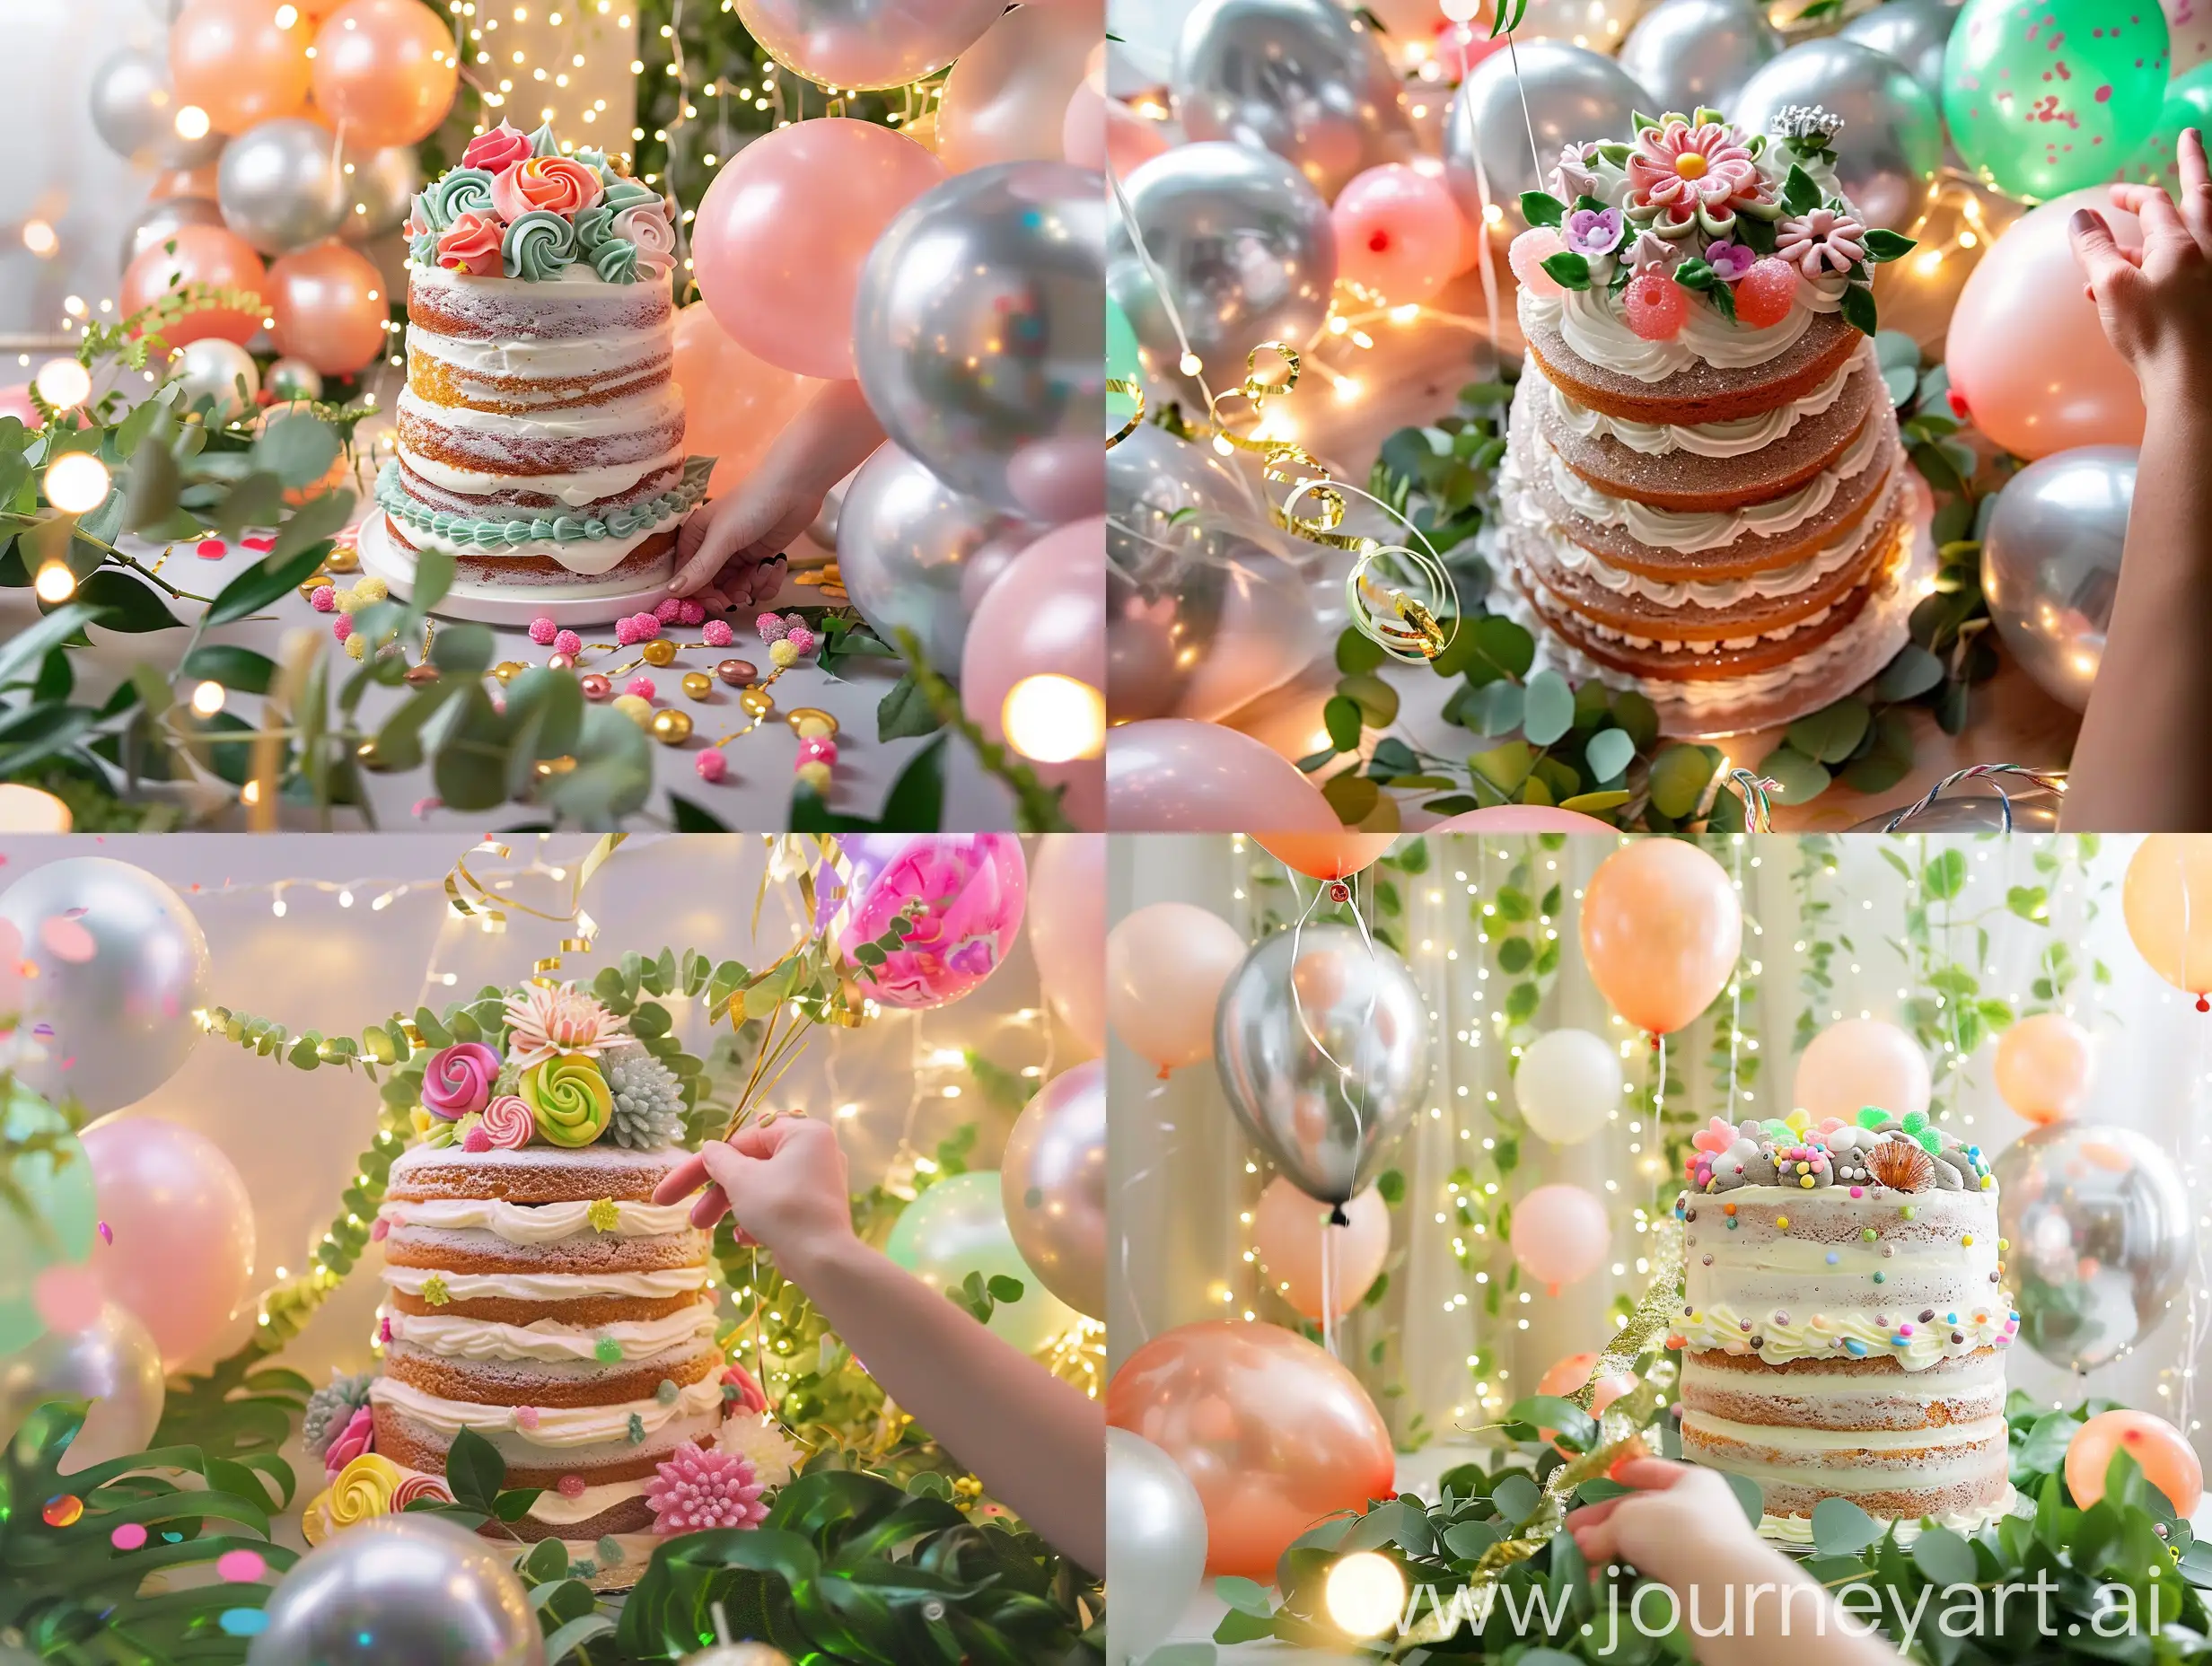 Joyful-Celebration-with-Delicate-Cake-and-Shimmering-Balloons